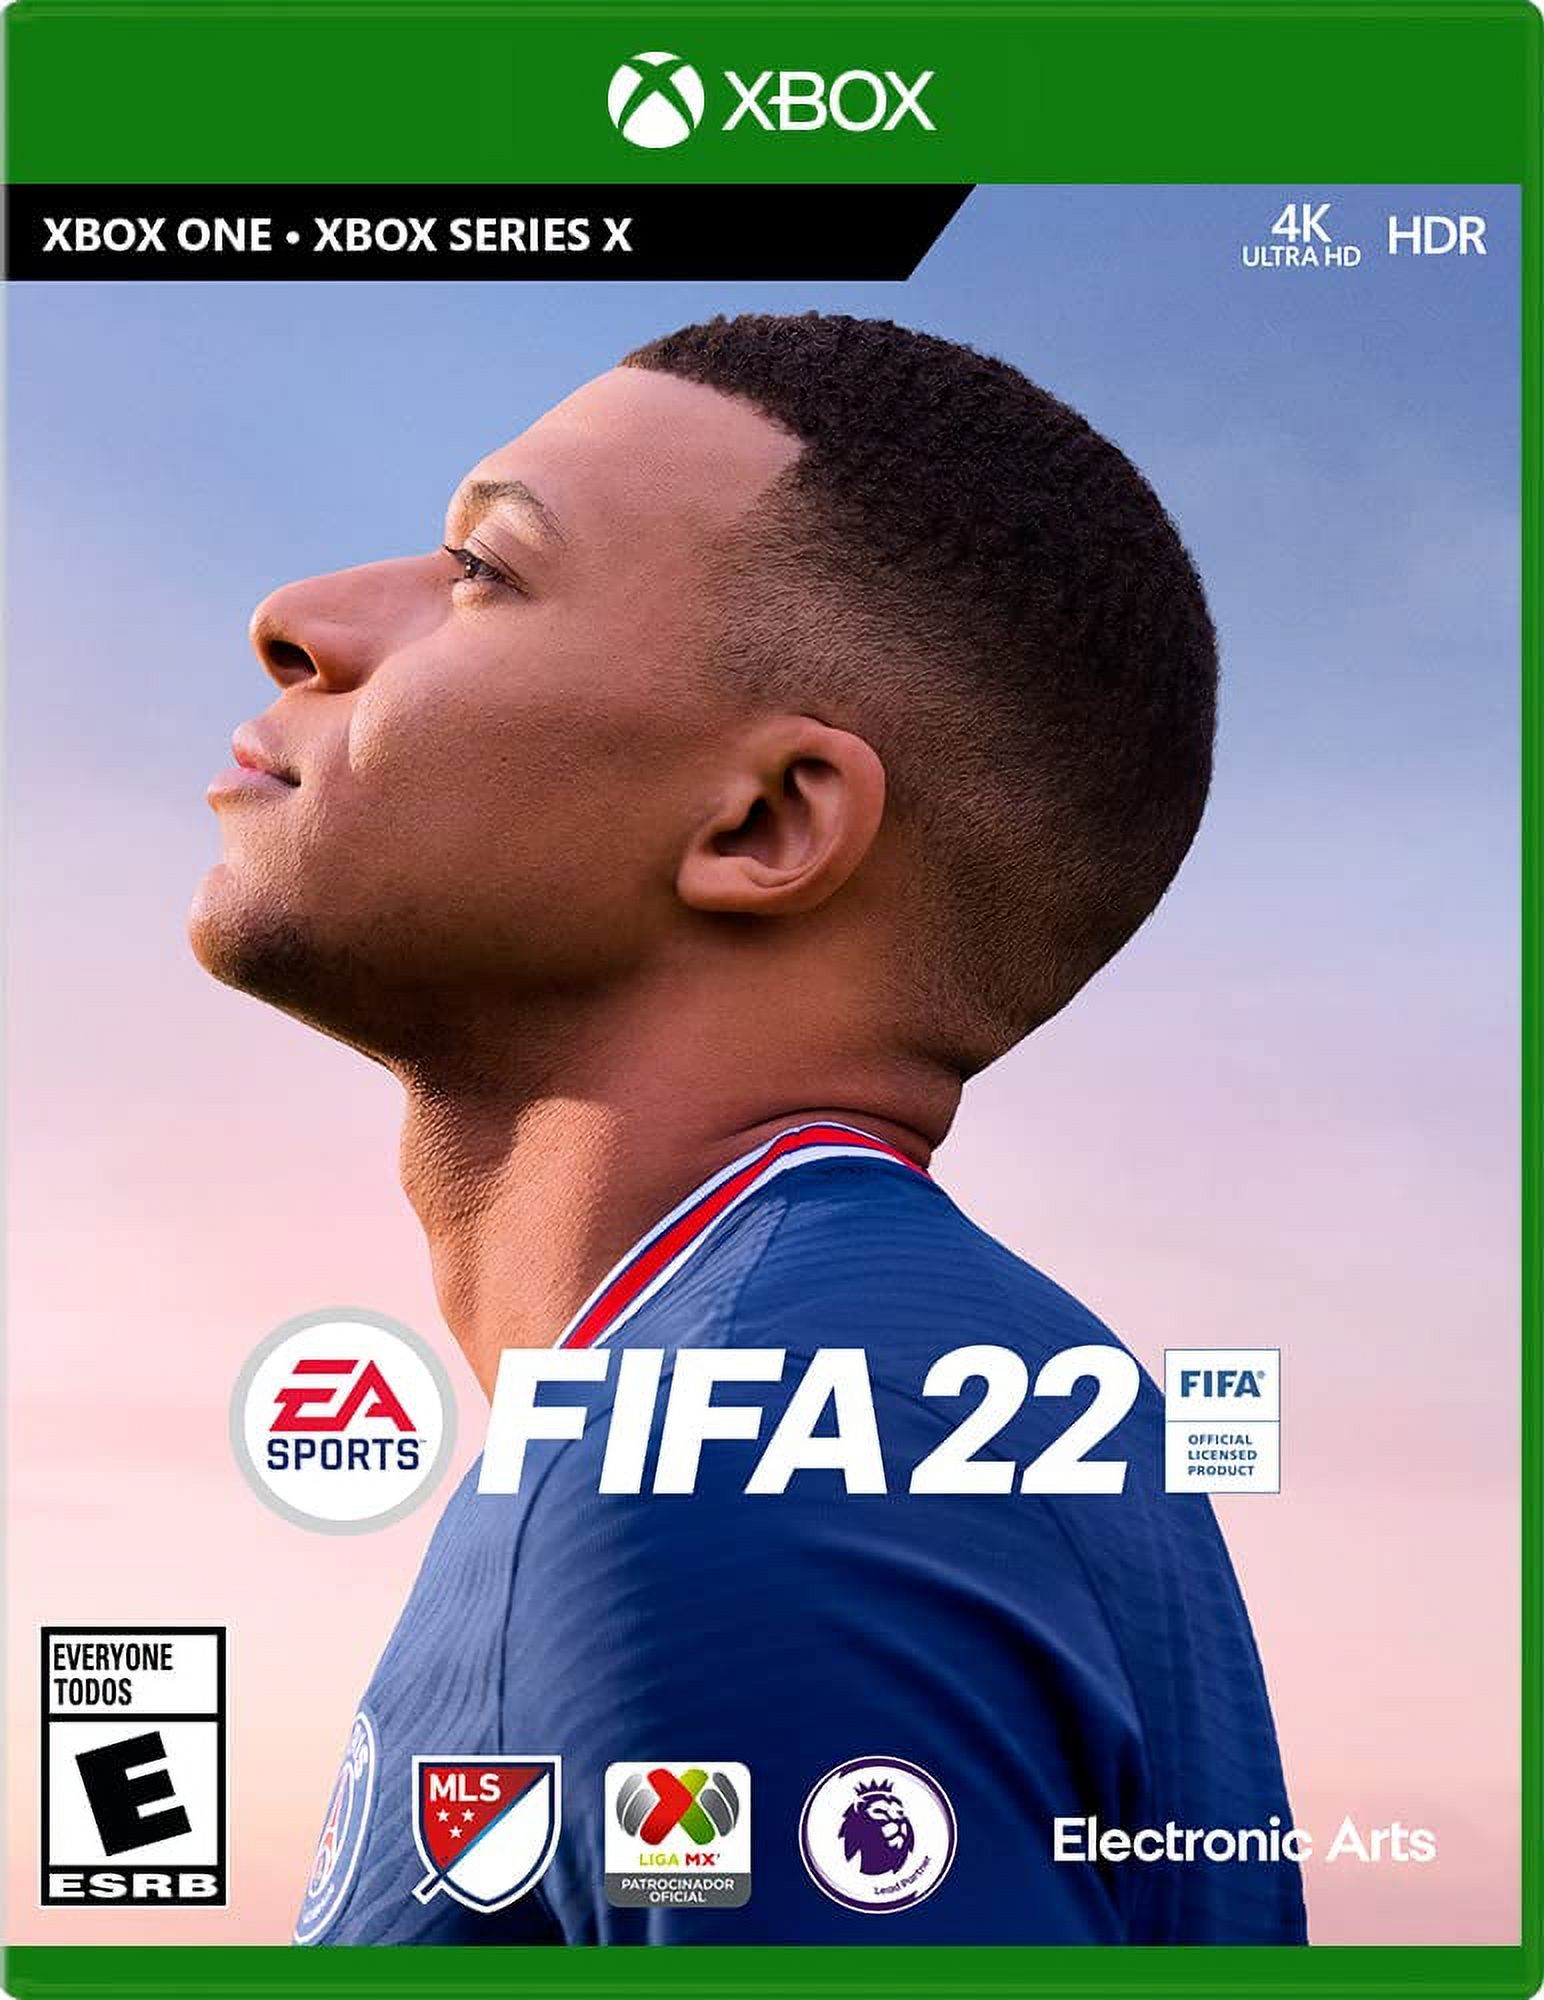 FIFA 22, Electronic Arts, Xbox One, [Physical] - image 1 of 2